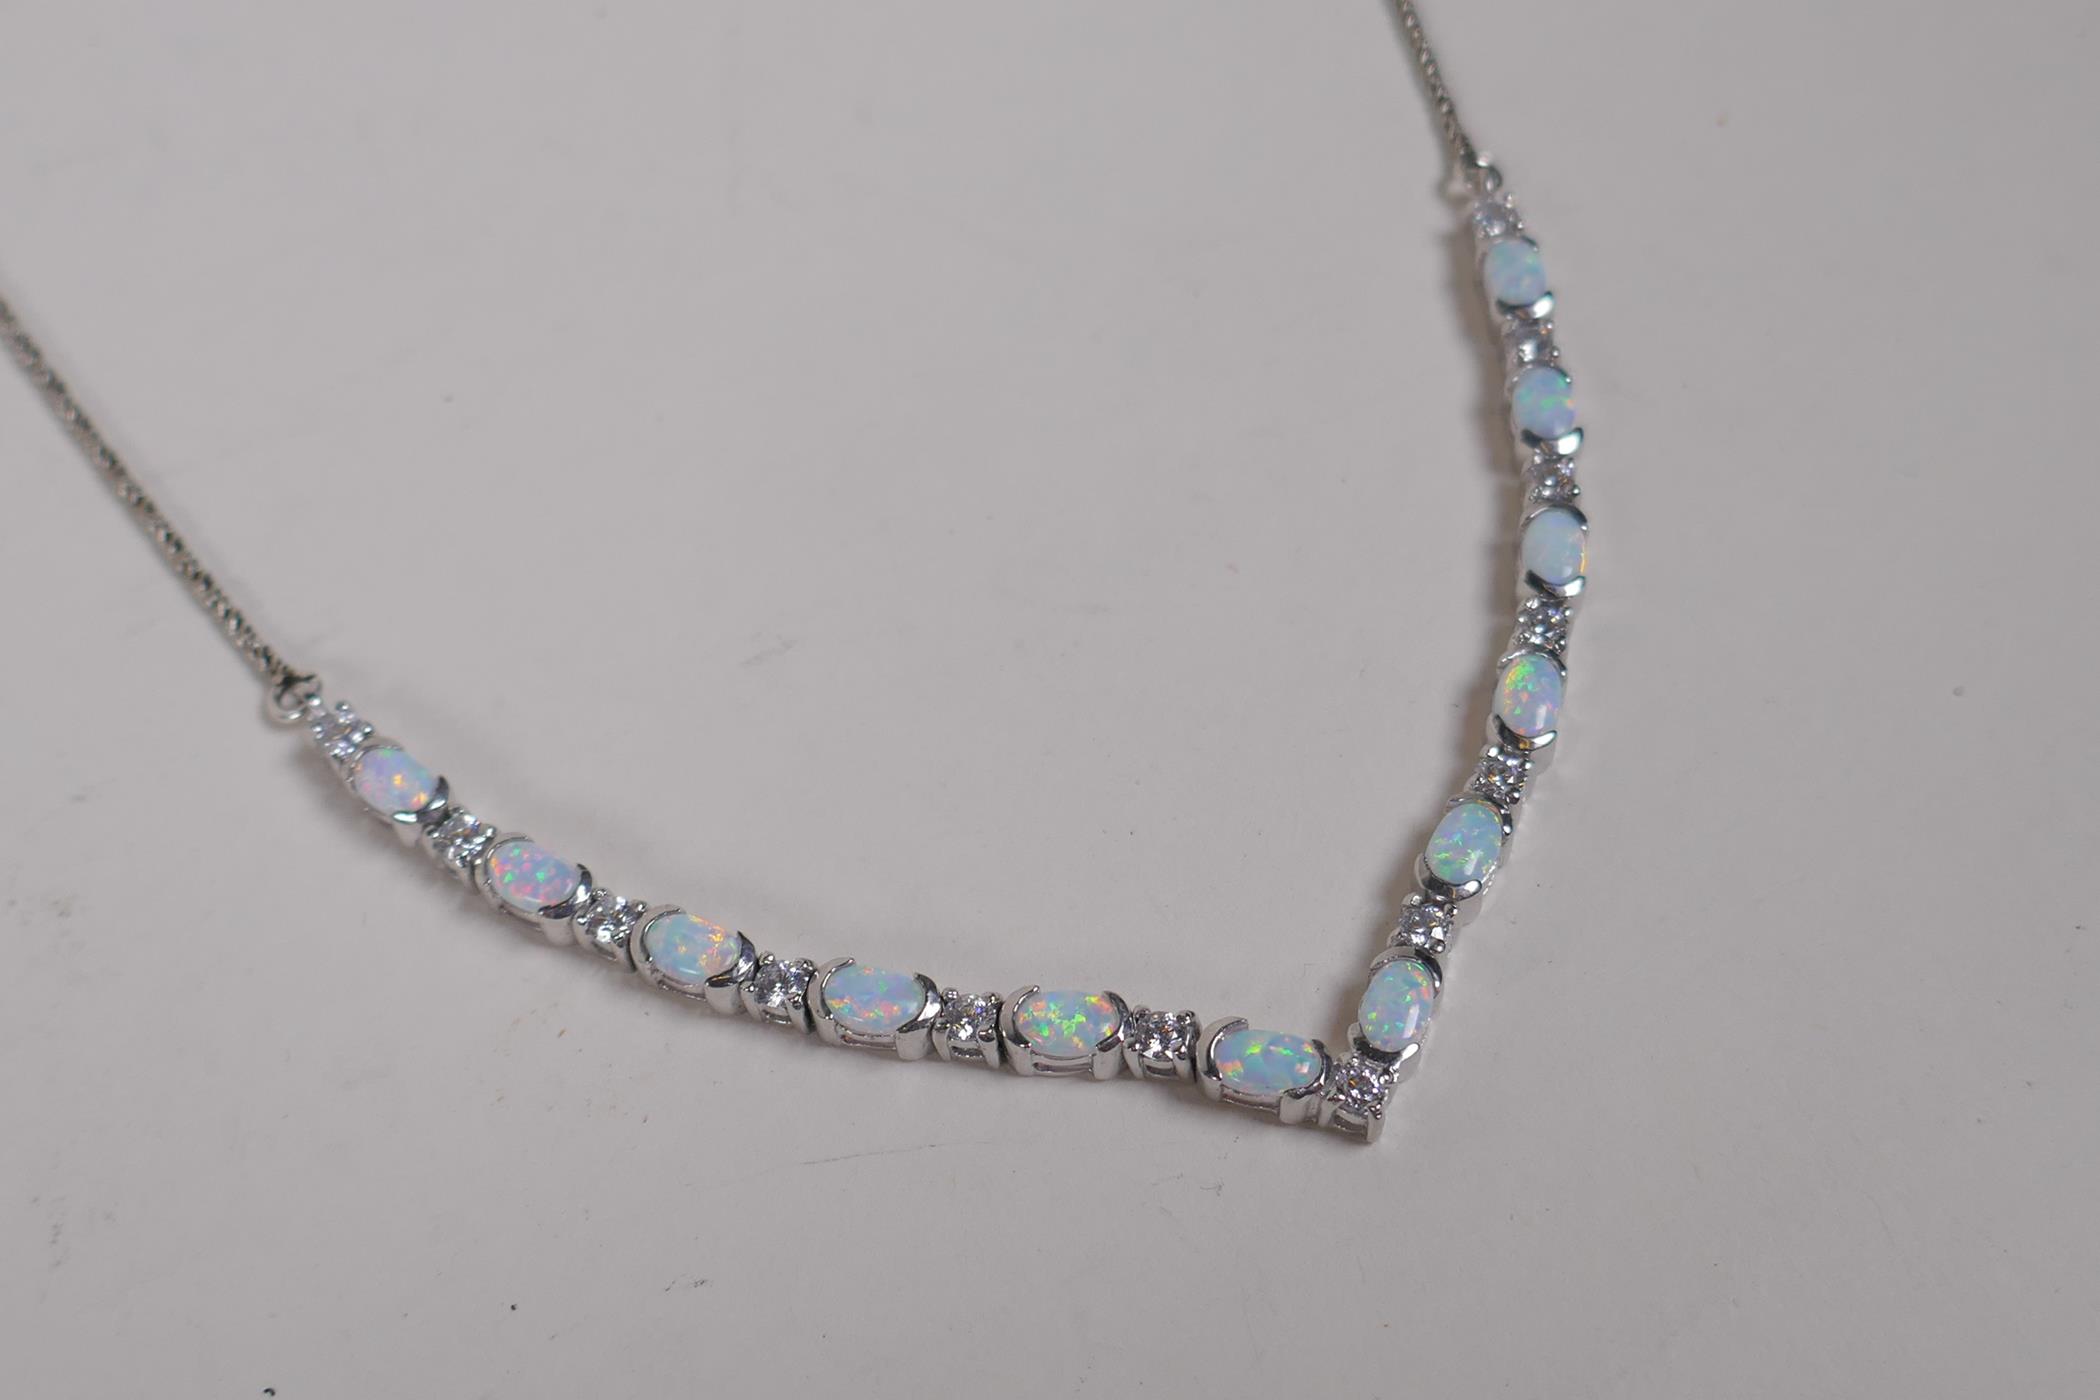 A 925 silver, cubic zirconia and opalite set necklace, 52cm long - Image 2 of 2